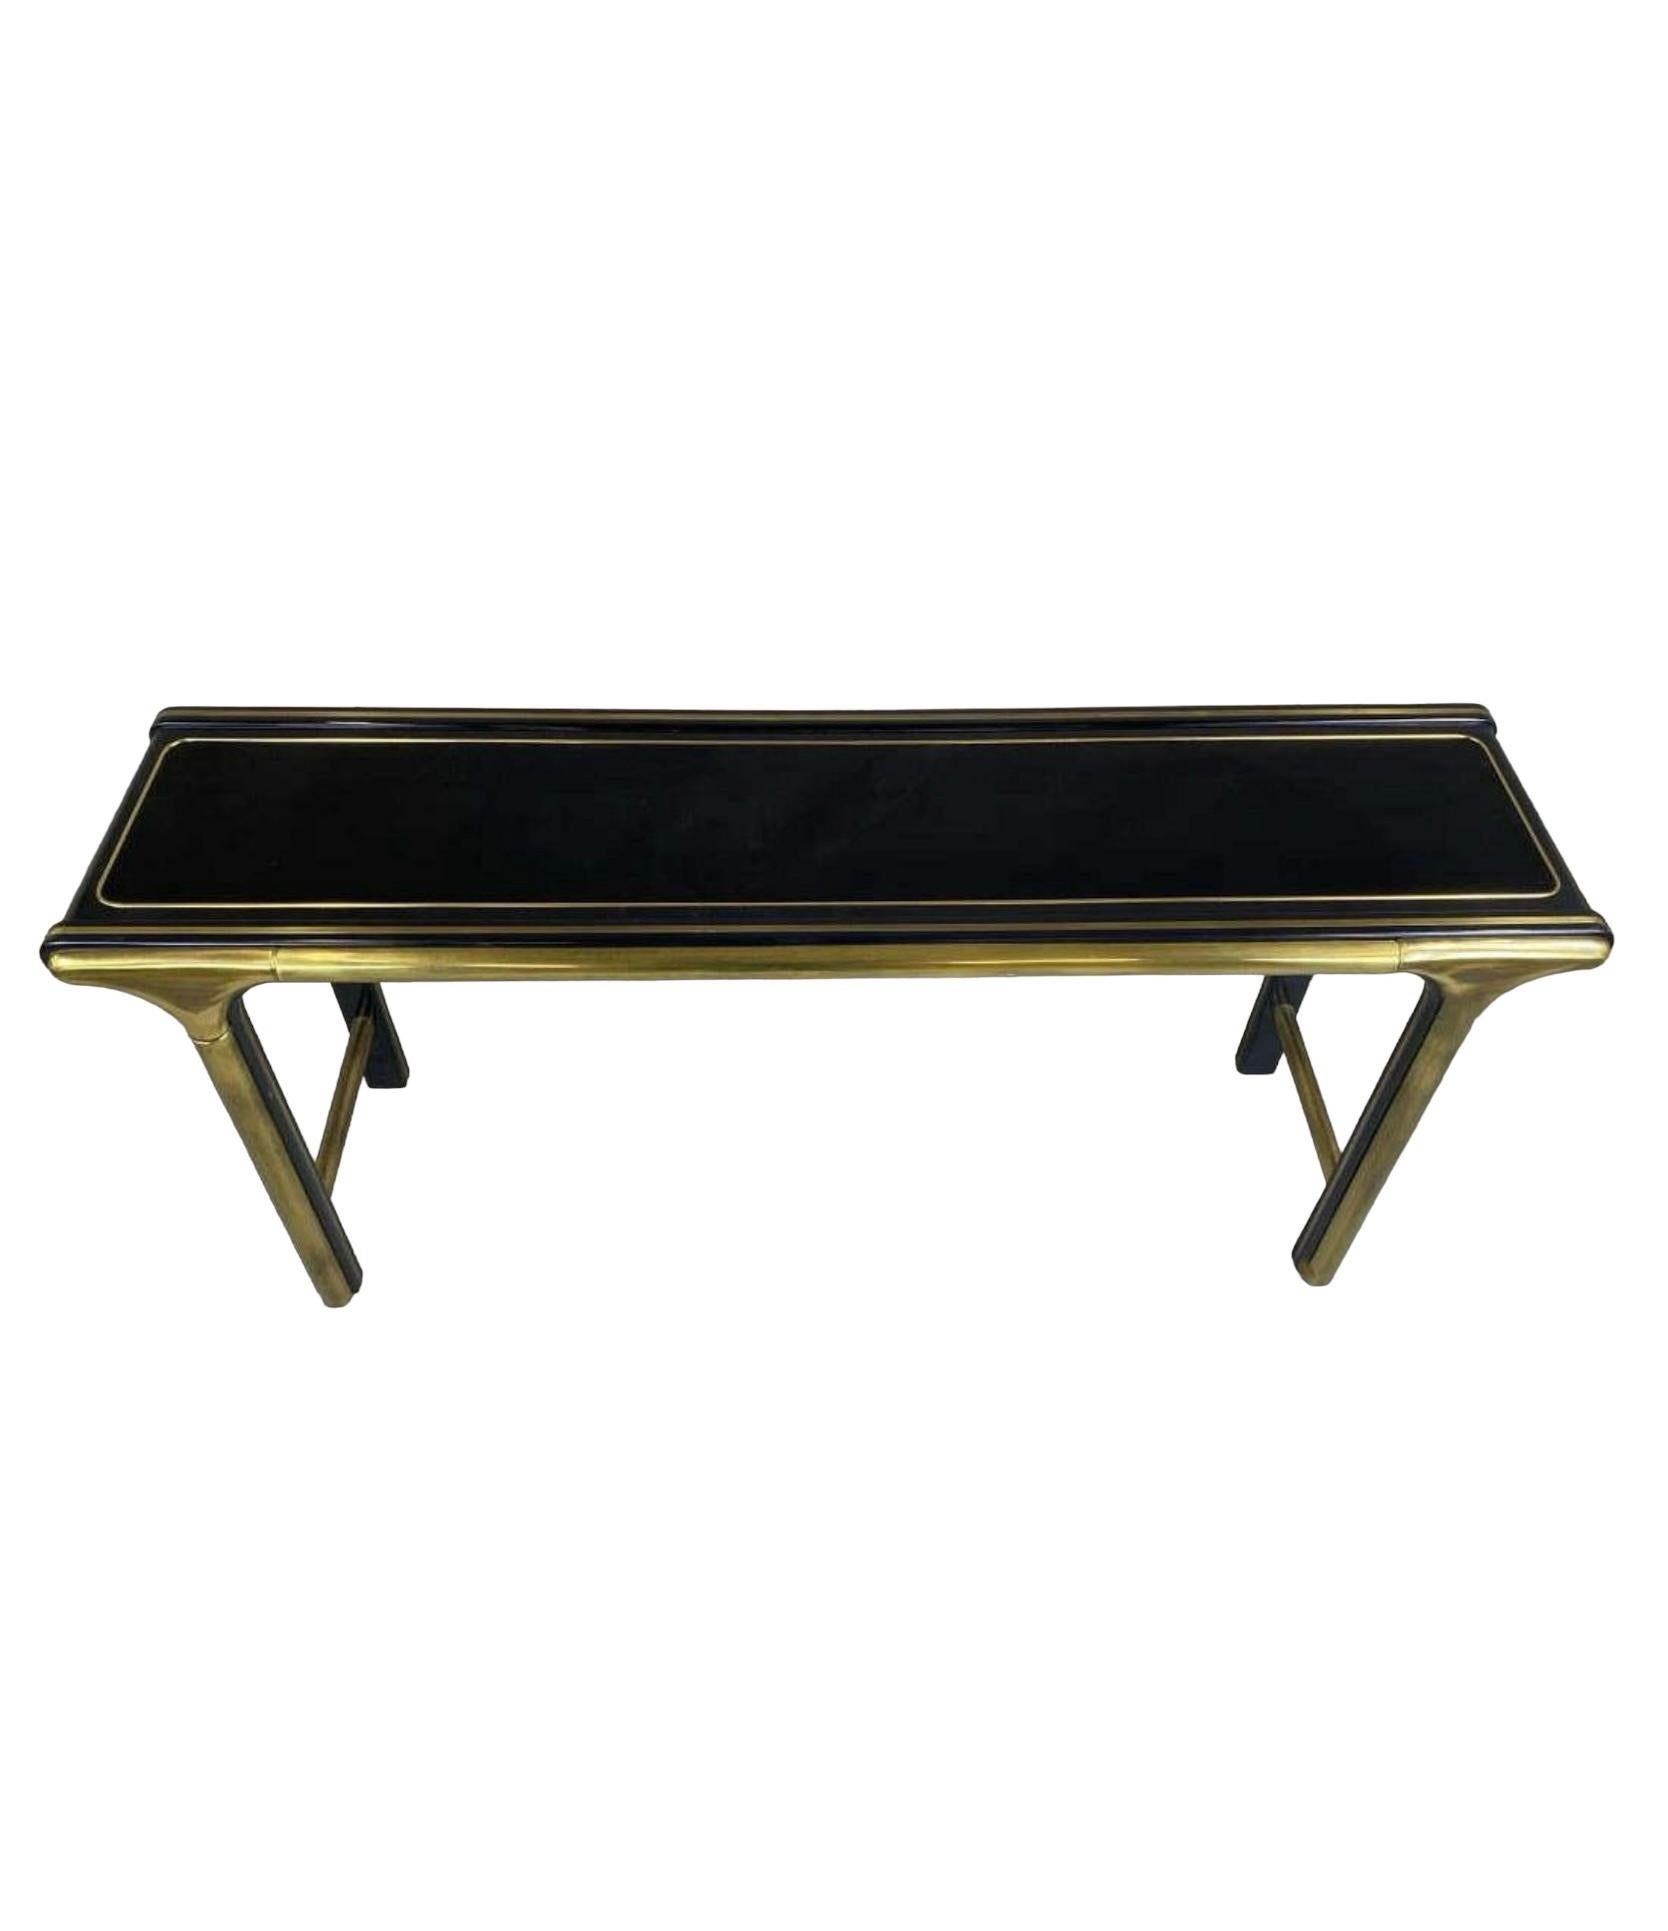 20th Century Modern Brass And Lacquer Console Table By William Doezema For Mastercraft For Sale